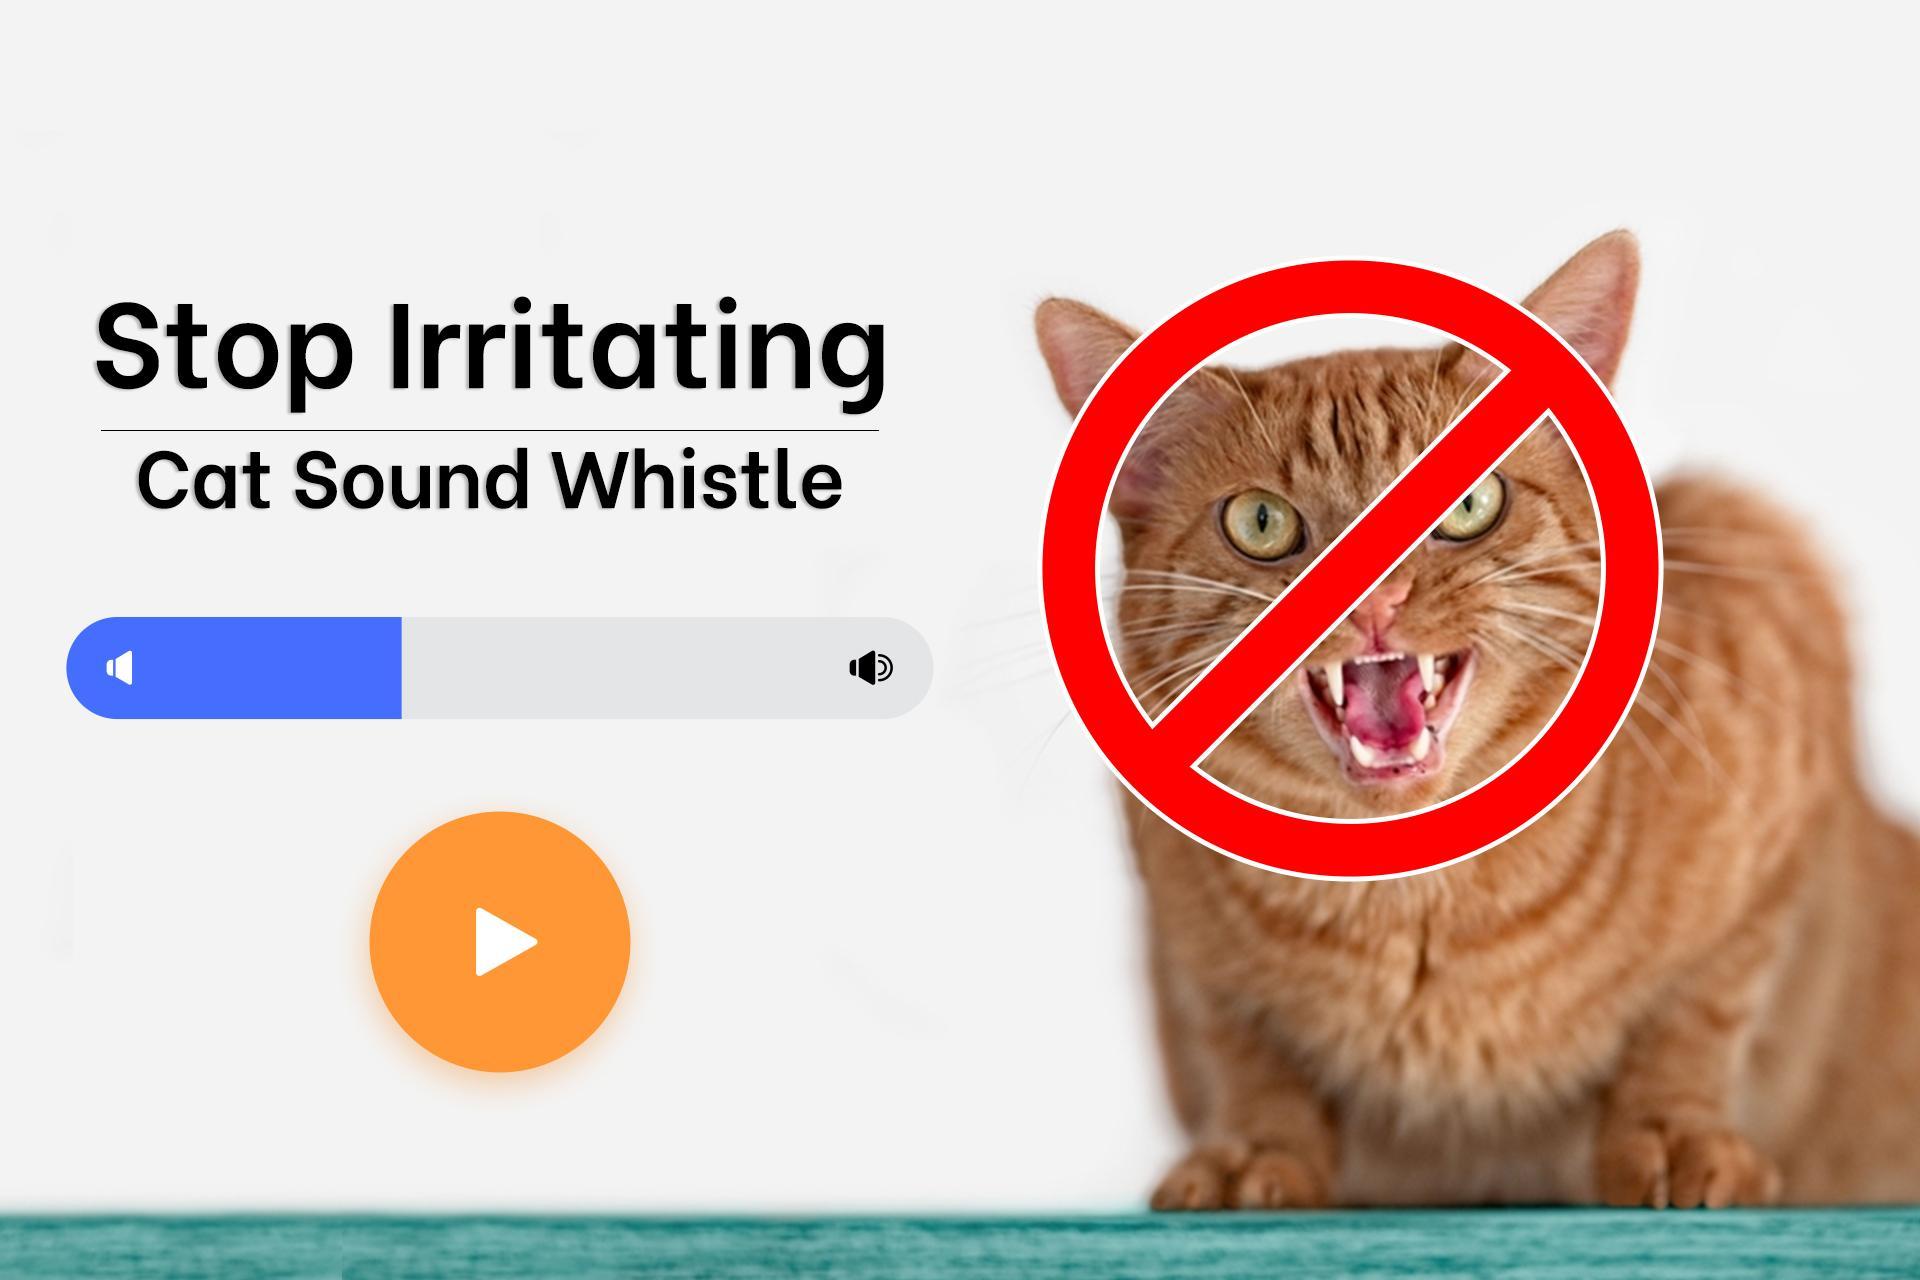 Stop Irritating Cat Sound Whistle for Android - APK Download